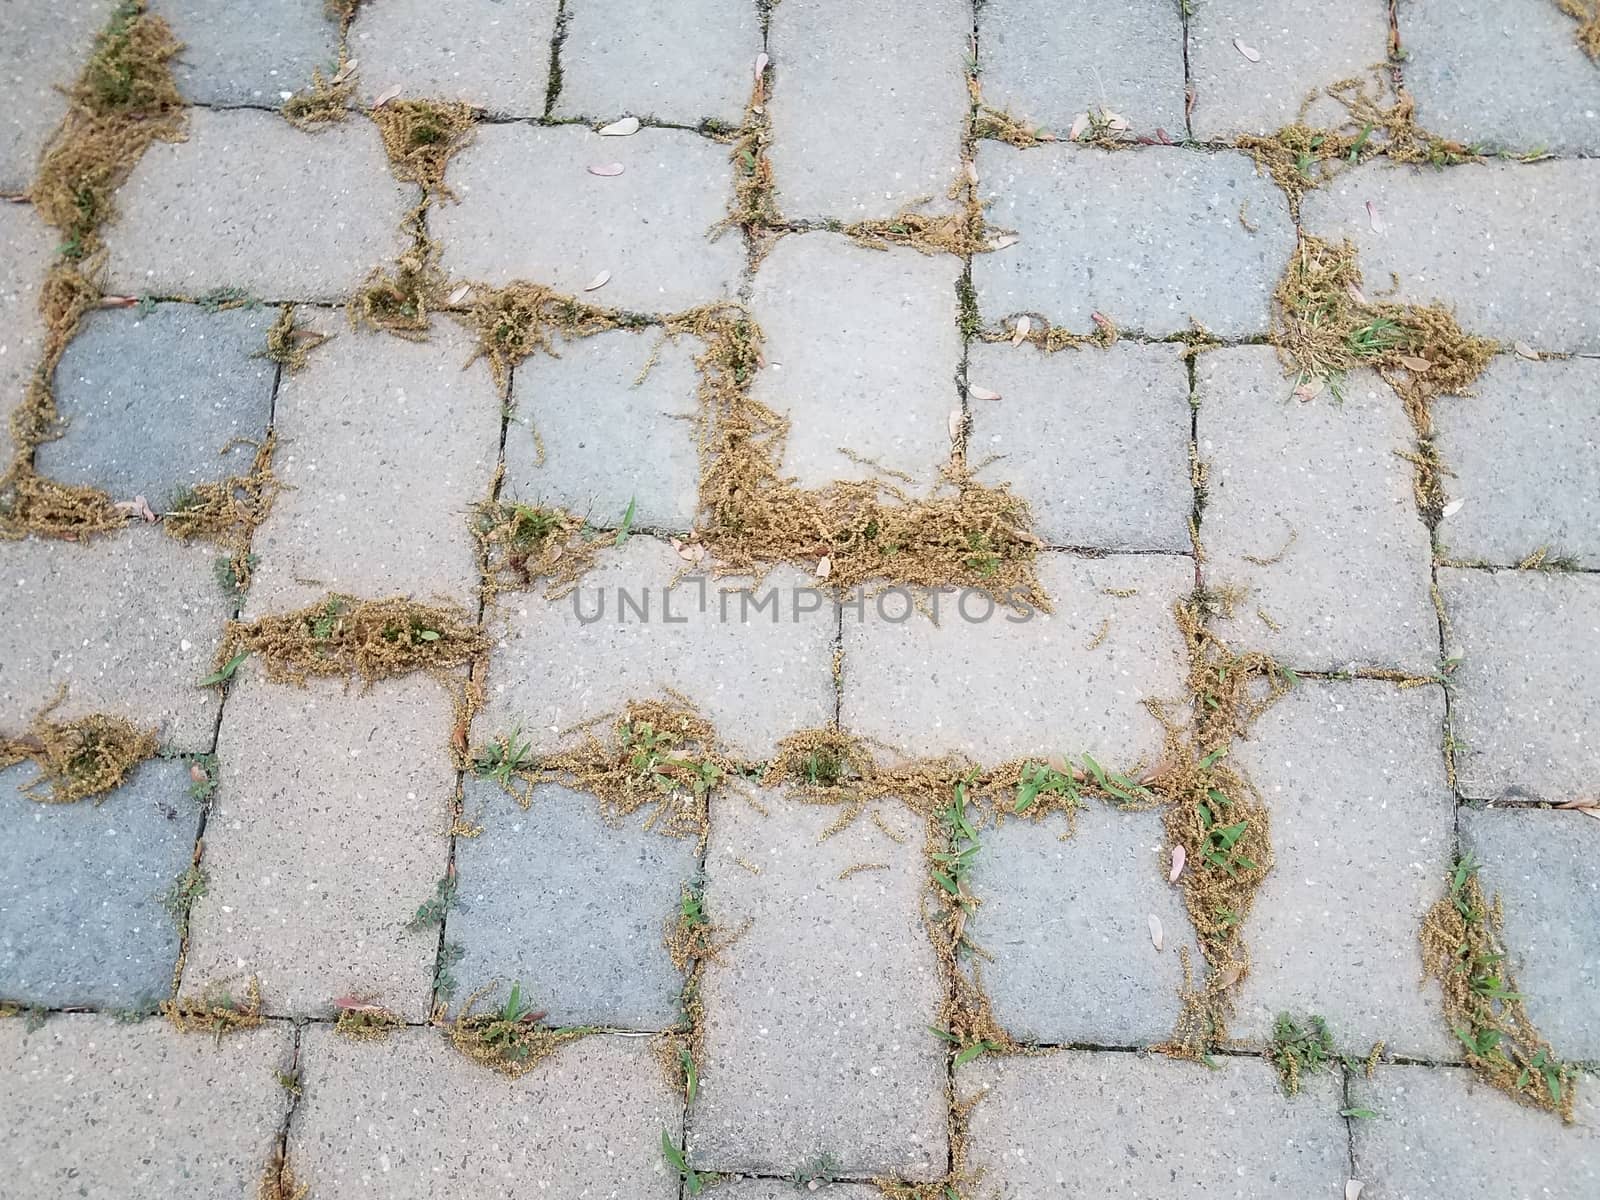 grey stone tiles and pollen on ground and weeds or grass